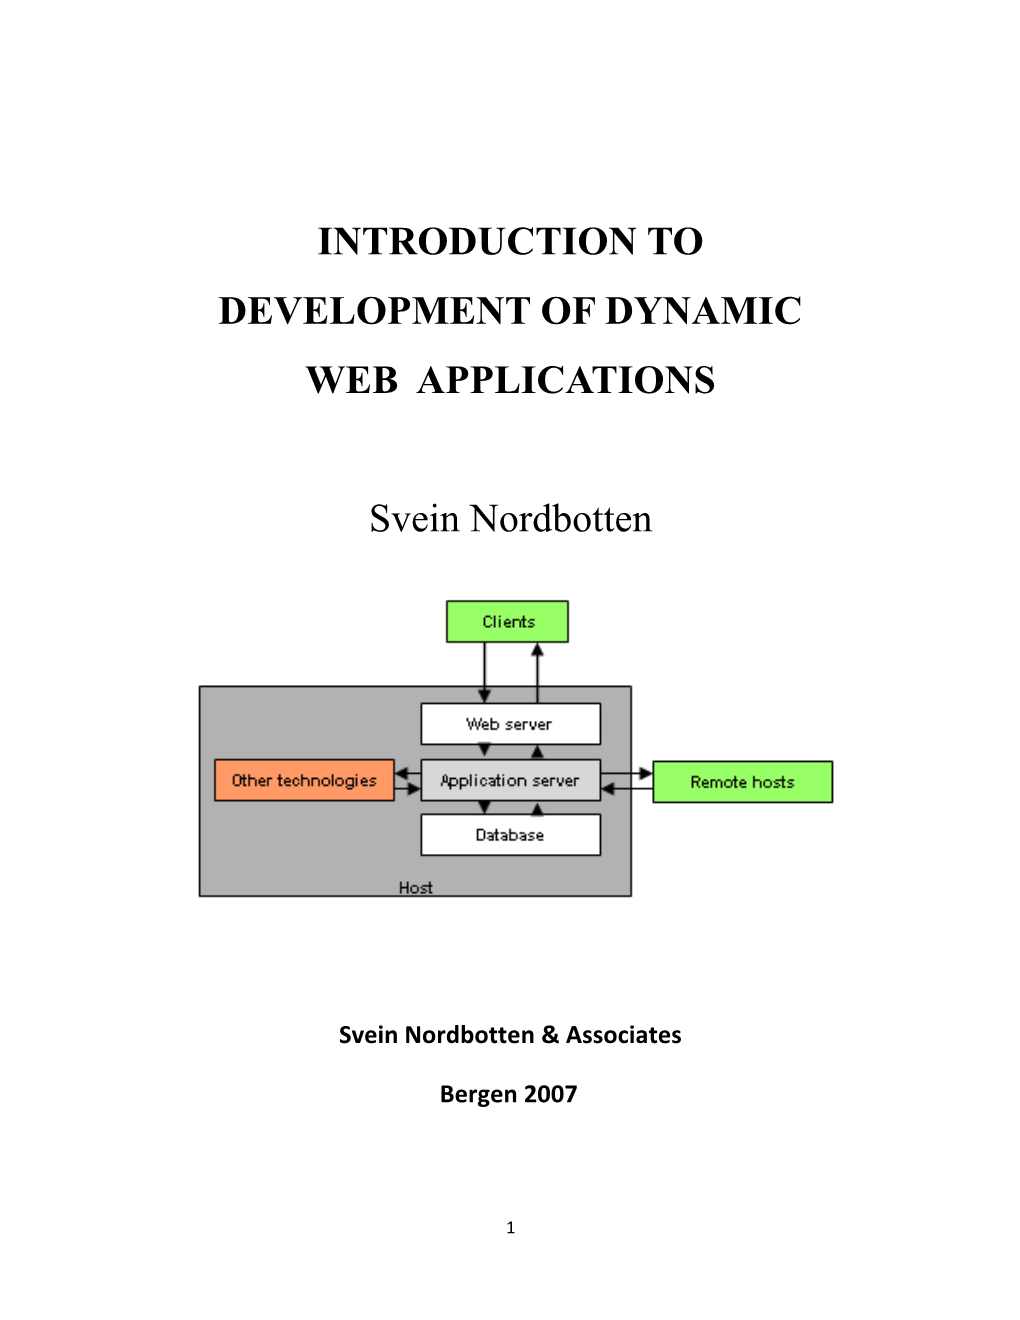 Introduction to Development of Dynamic Web Applications